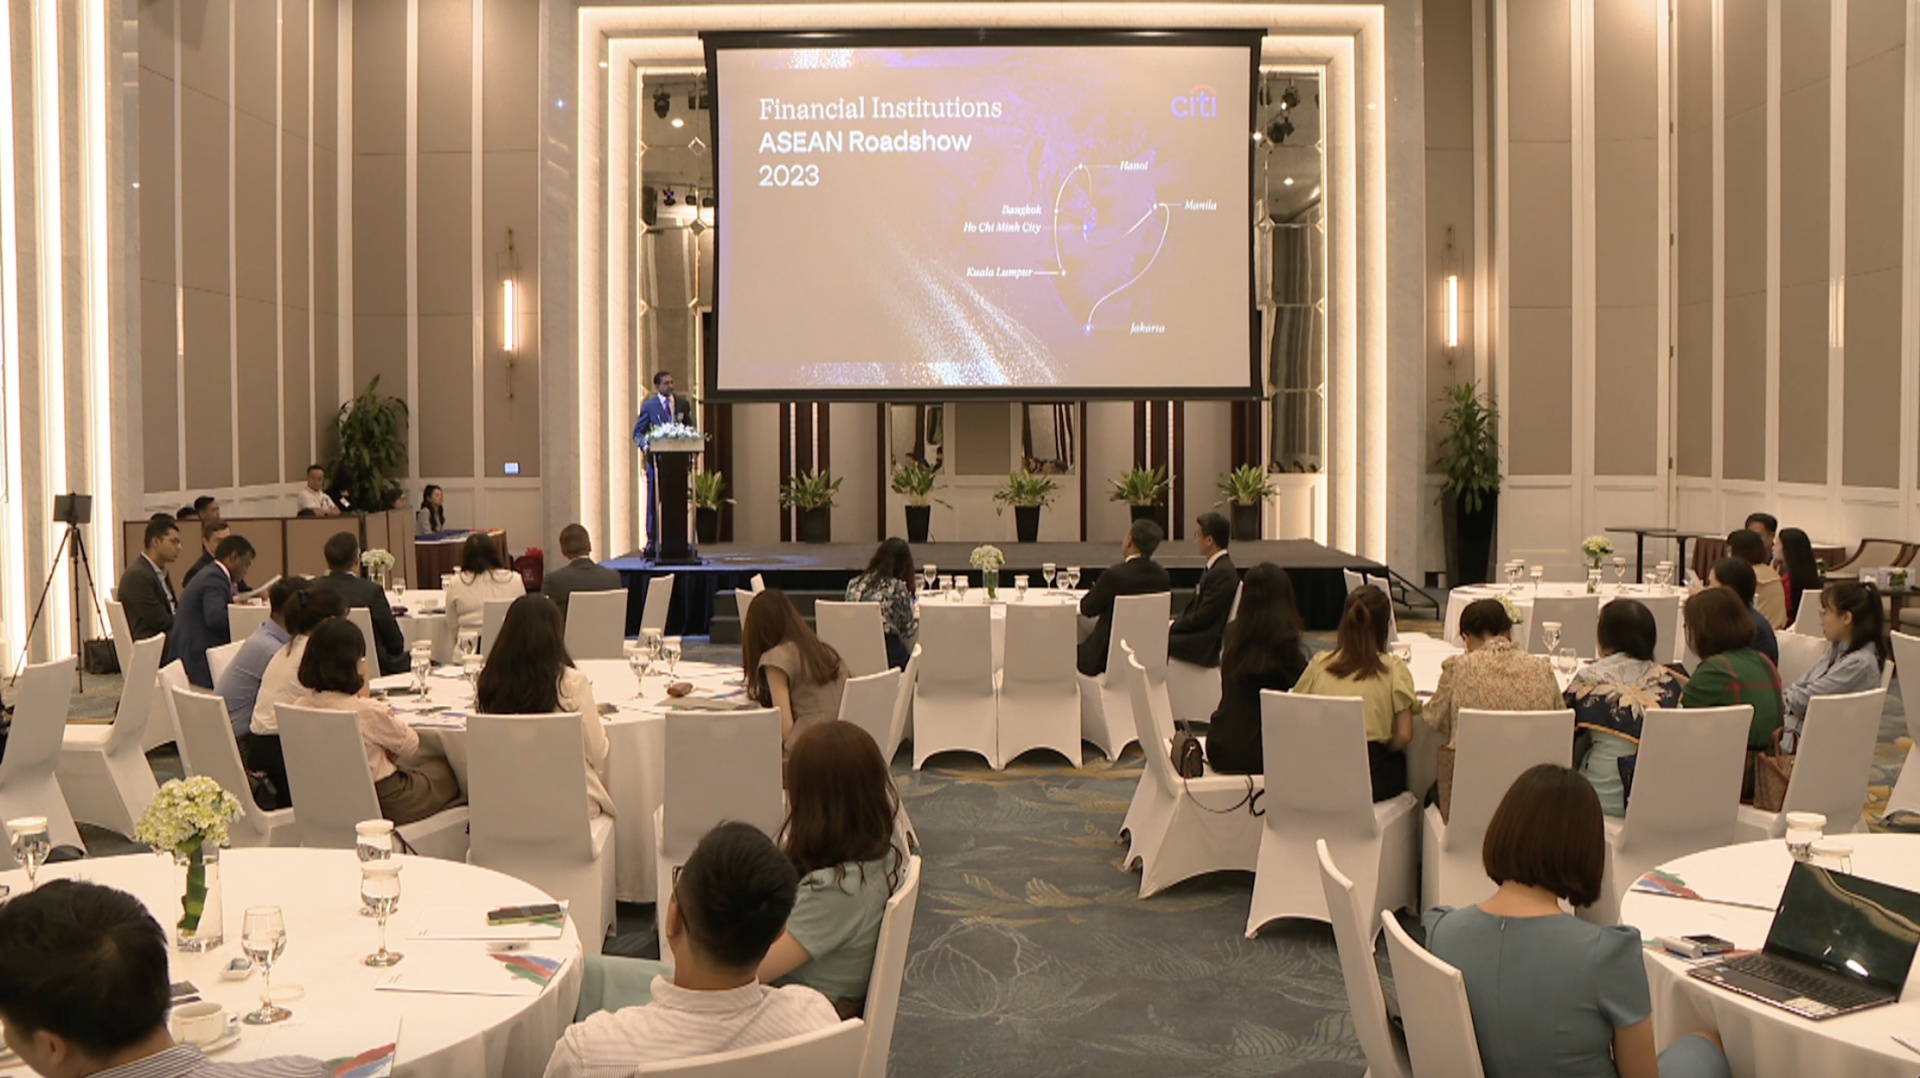 Citi commends local banks at ASEAN roadshows